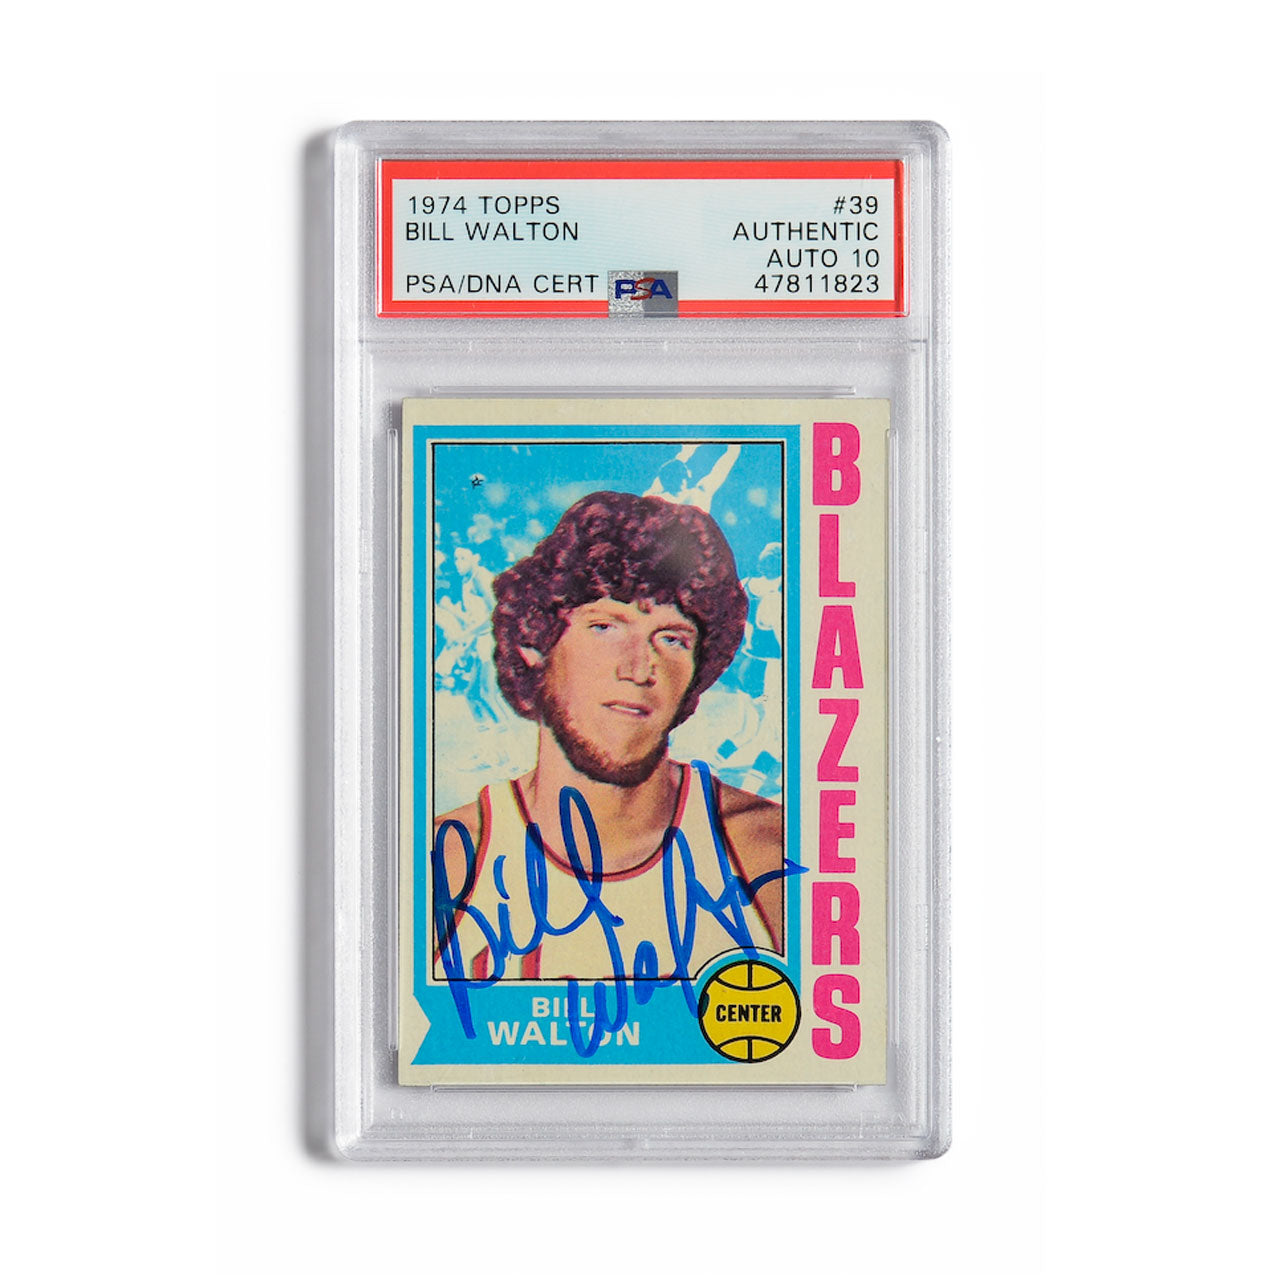 1974 Topps Bill Walton Autographed Rookie Card Uncrate